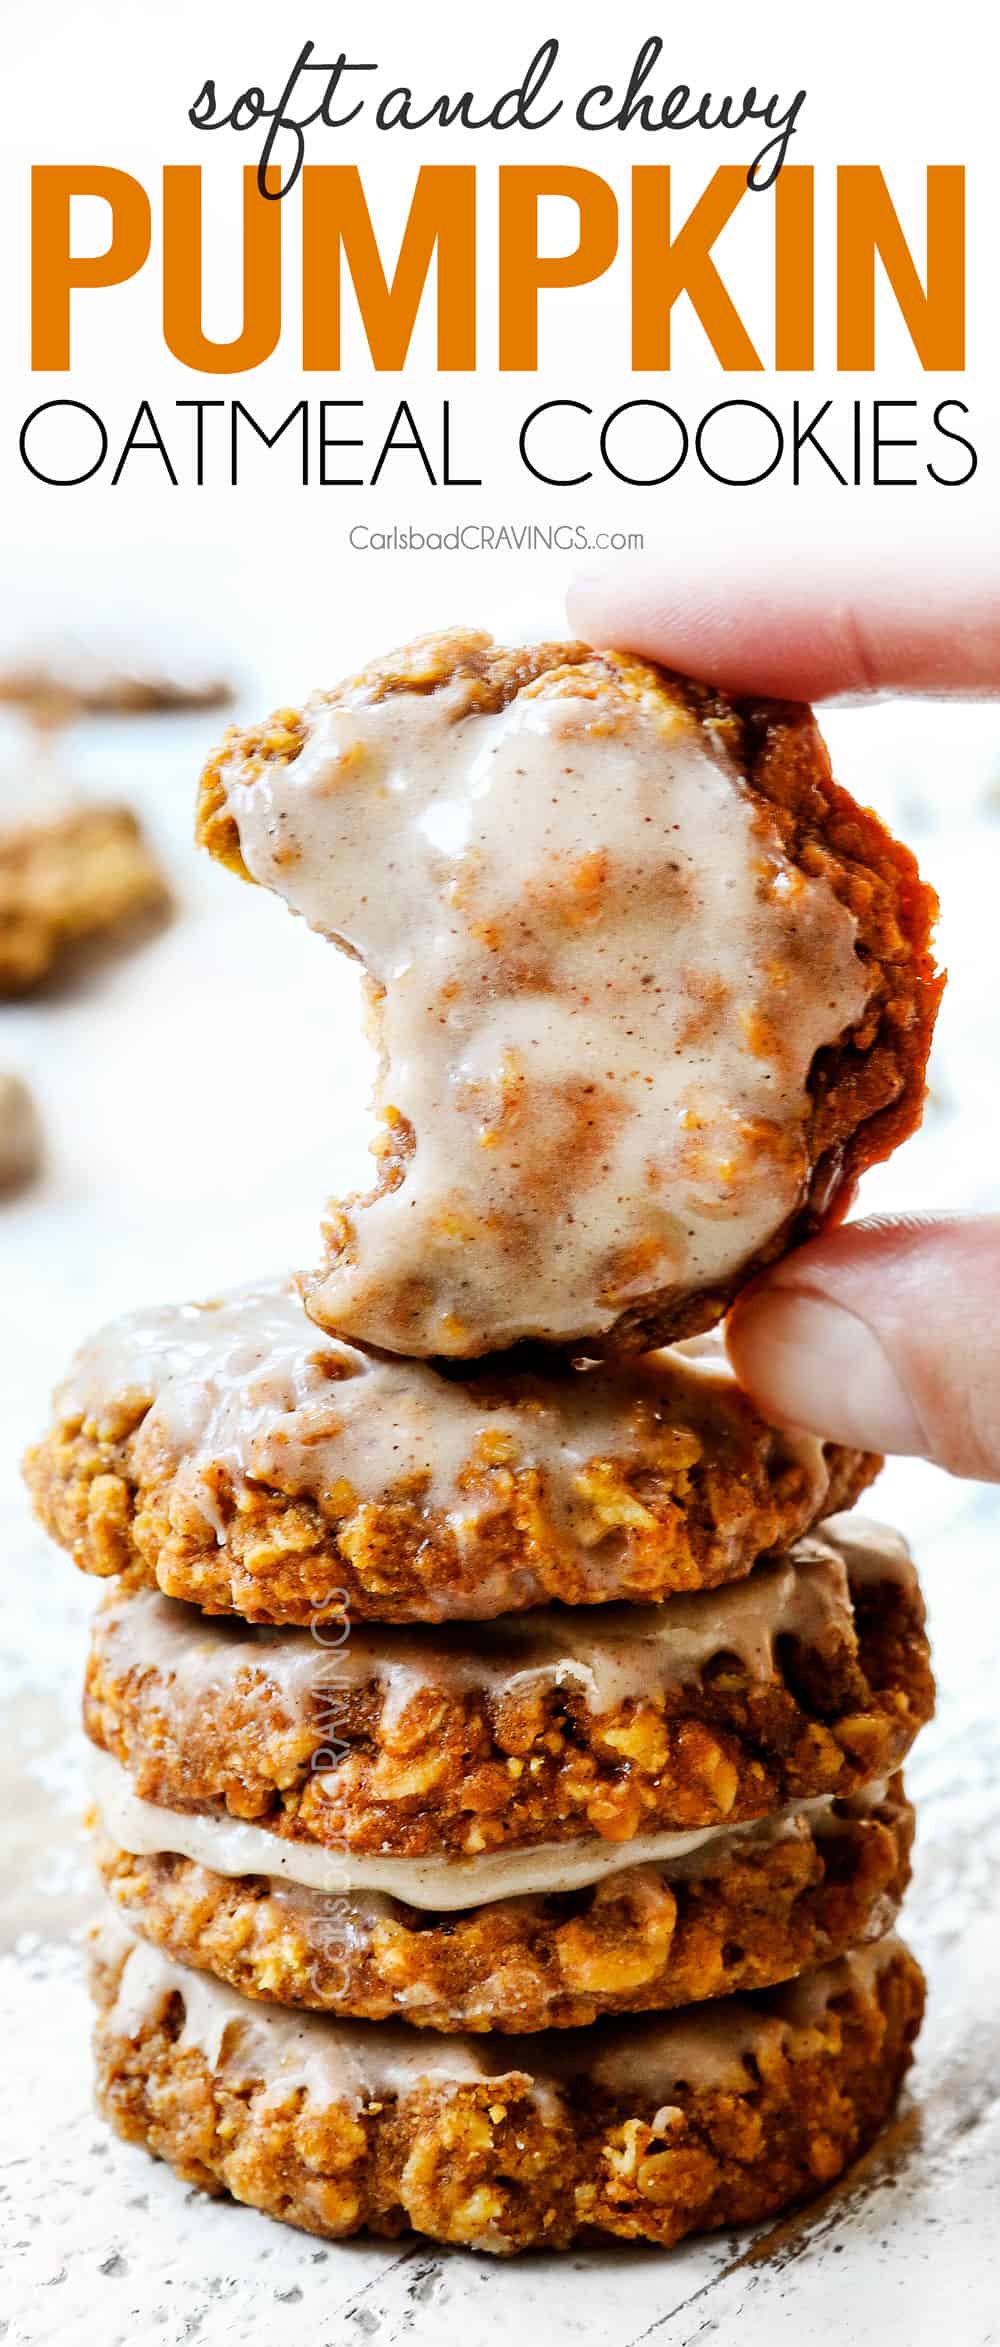 holding a pumpkin oatmeal cookie with icing